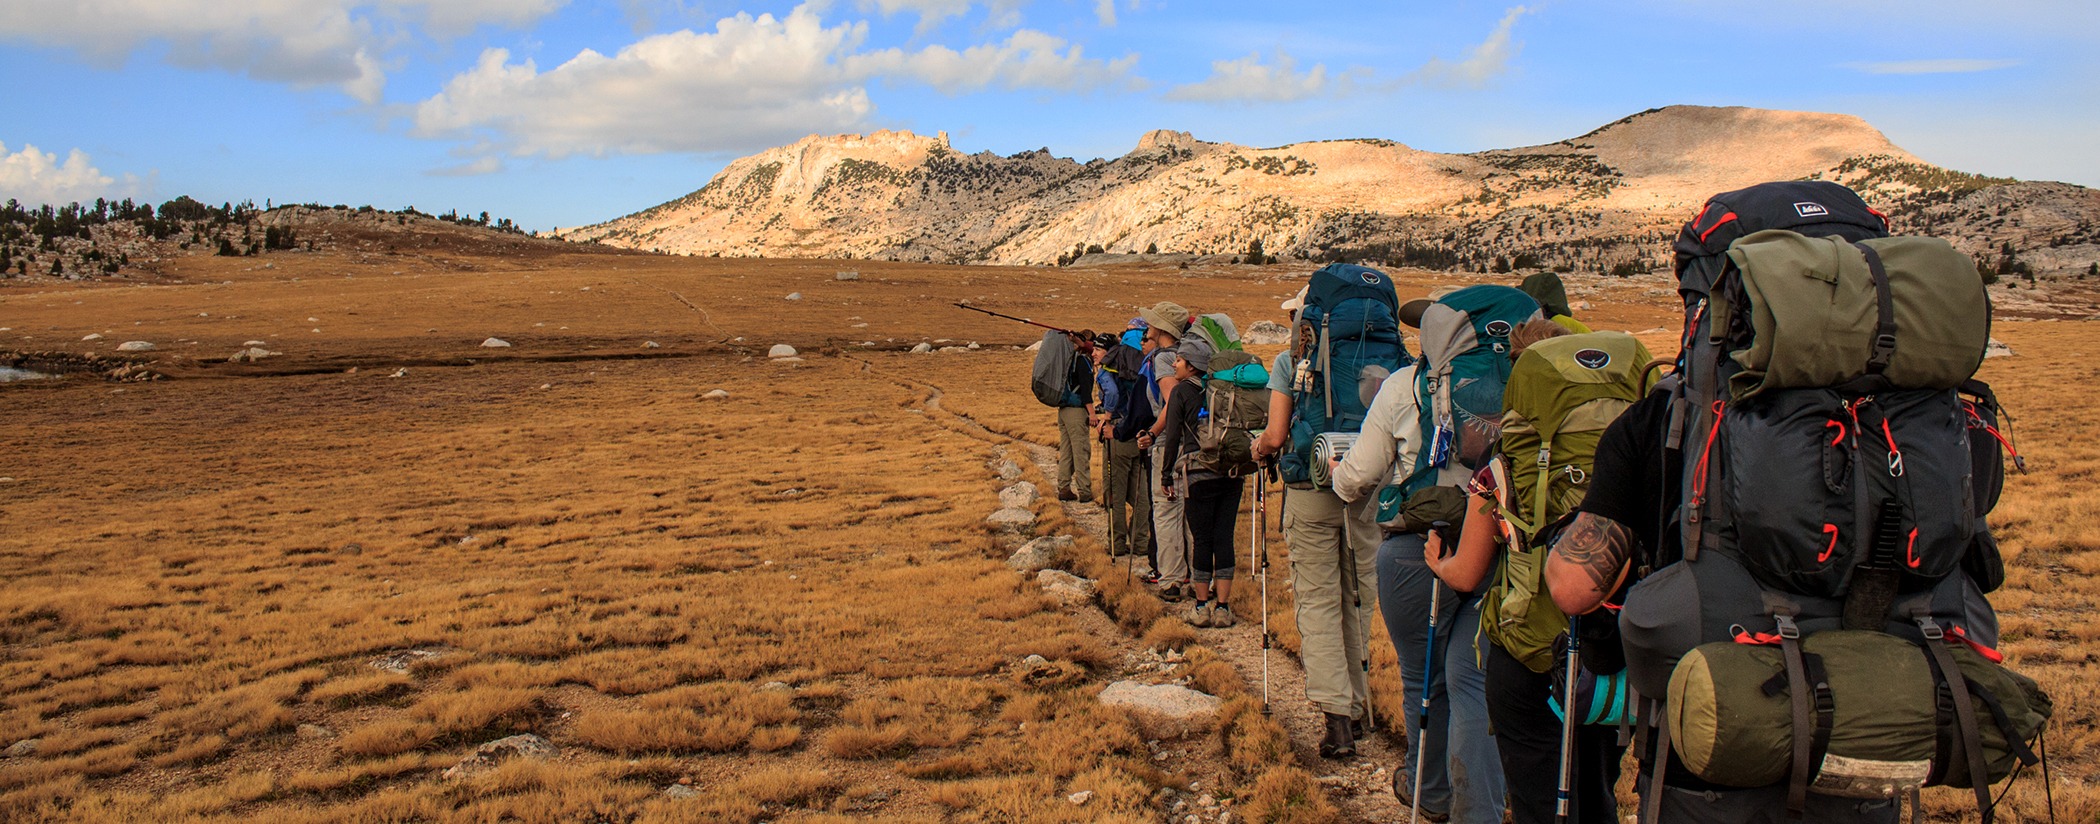 Backpackers hike in Yosemite's high country during a Yosemite Conservancy Outdoor Adventure. Photo: Katrin Hintermeier